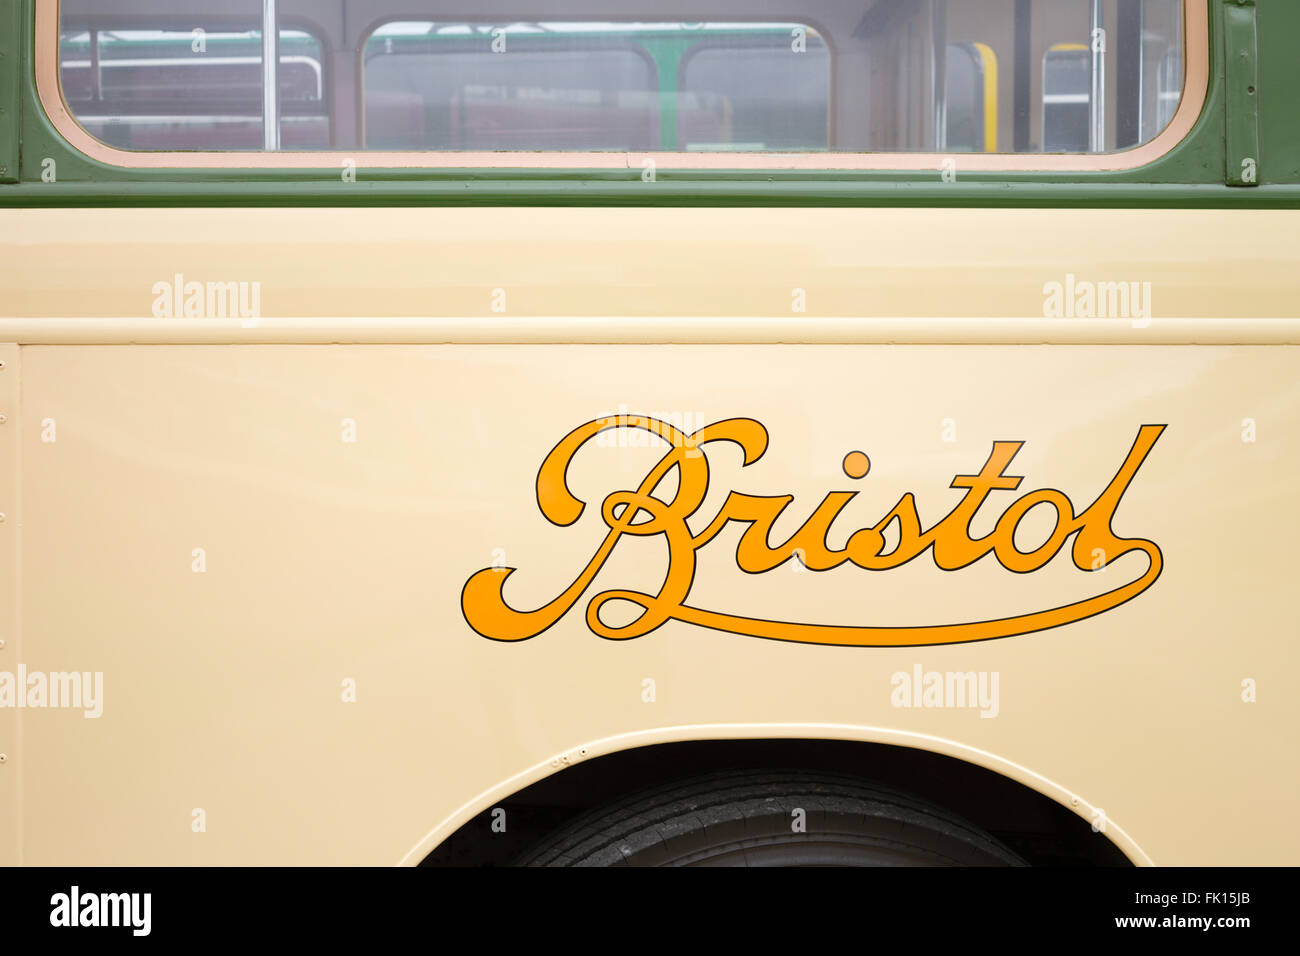 The 1950s/1960s Bristol Bus logo in yellow on a cream vintage bus. Stock Photo